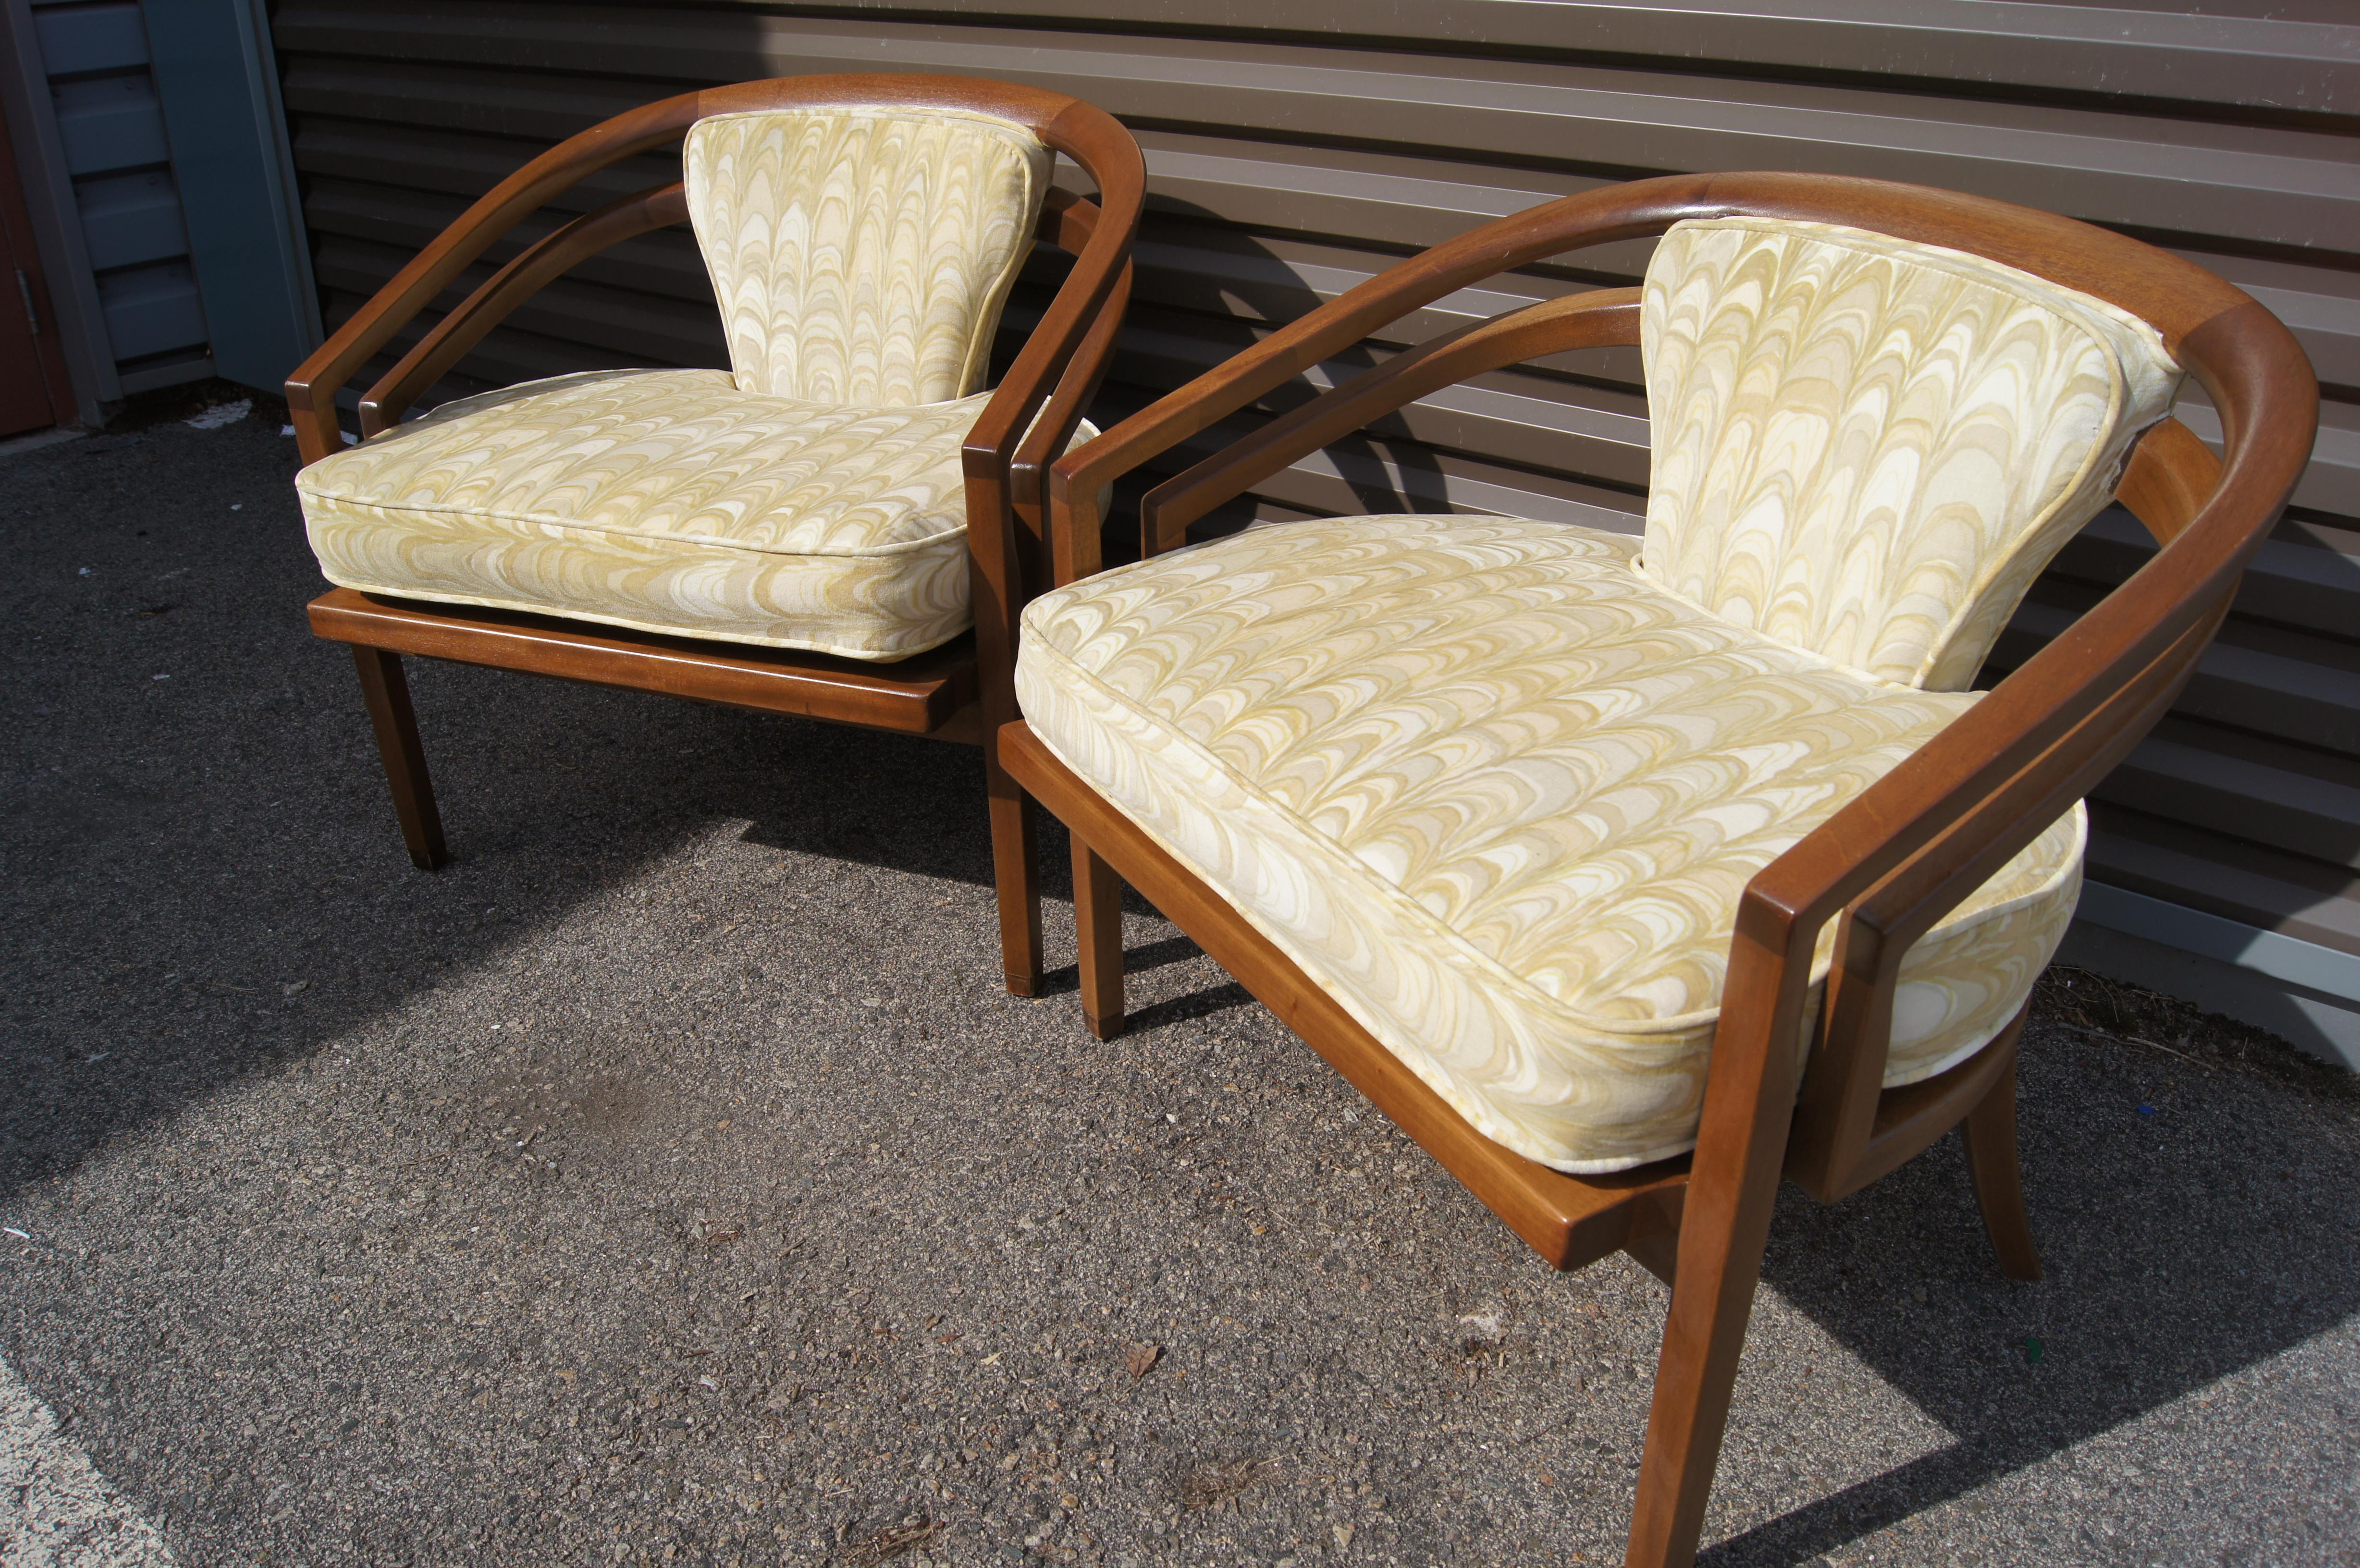 Pair of Wide Mahogany Armchairs by Baker with Jack Lenor Larsen Textile In Good Condition For Sale In Dorchester, MA